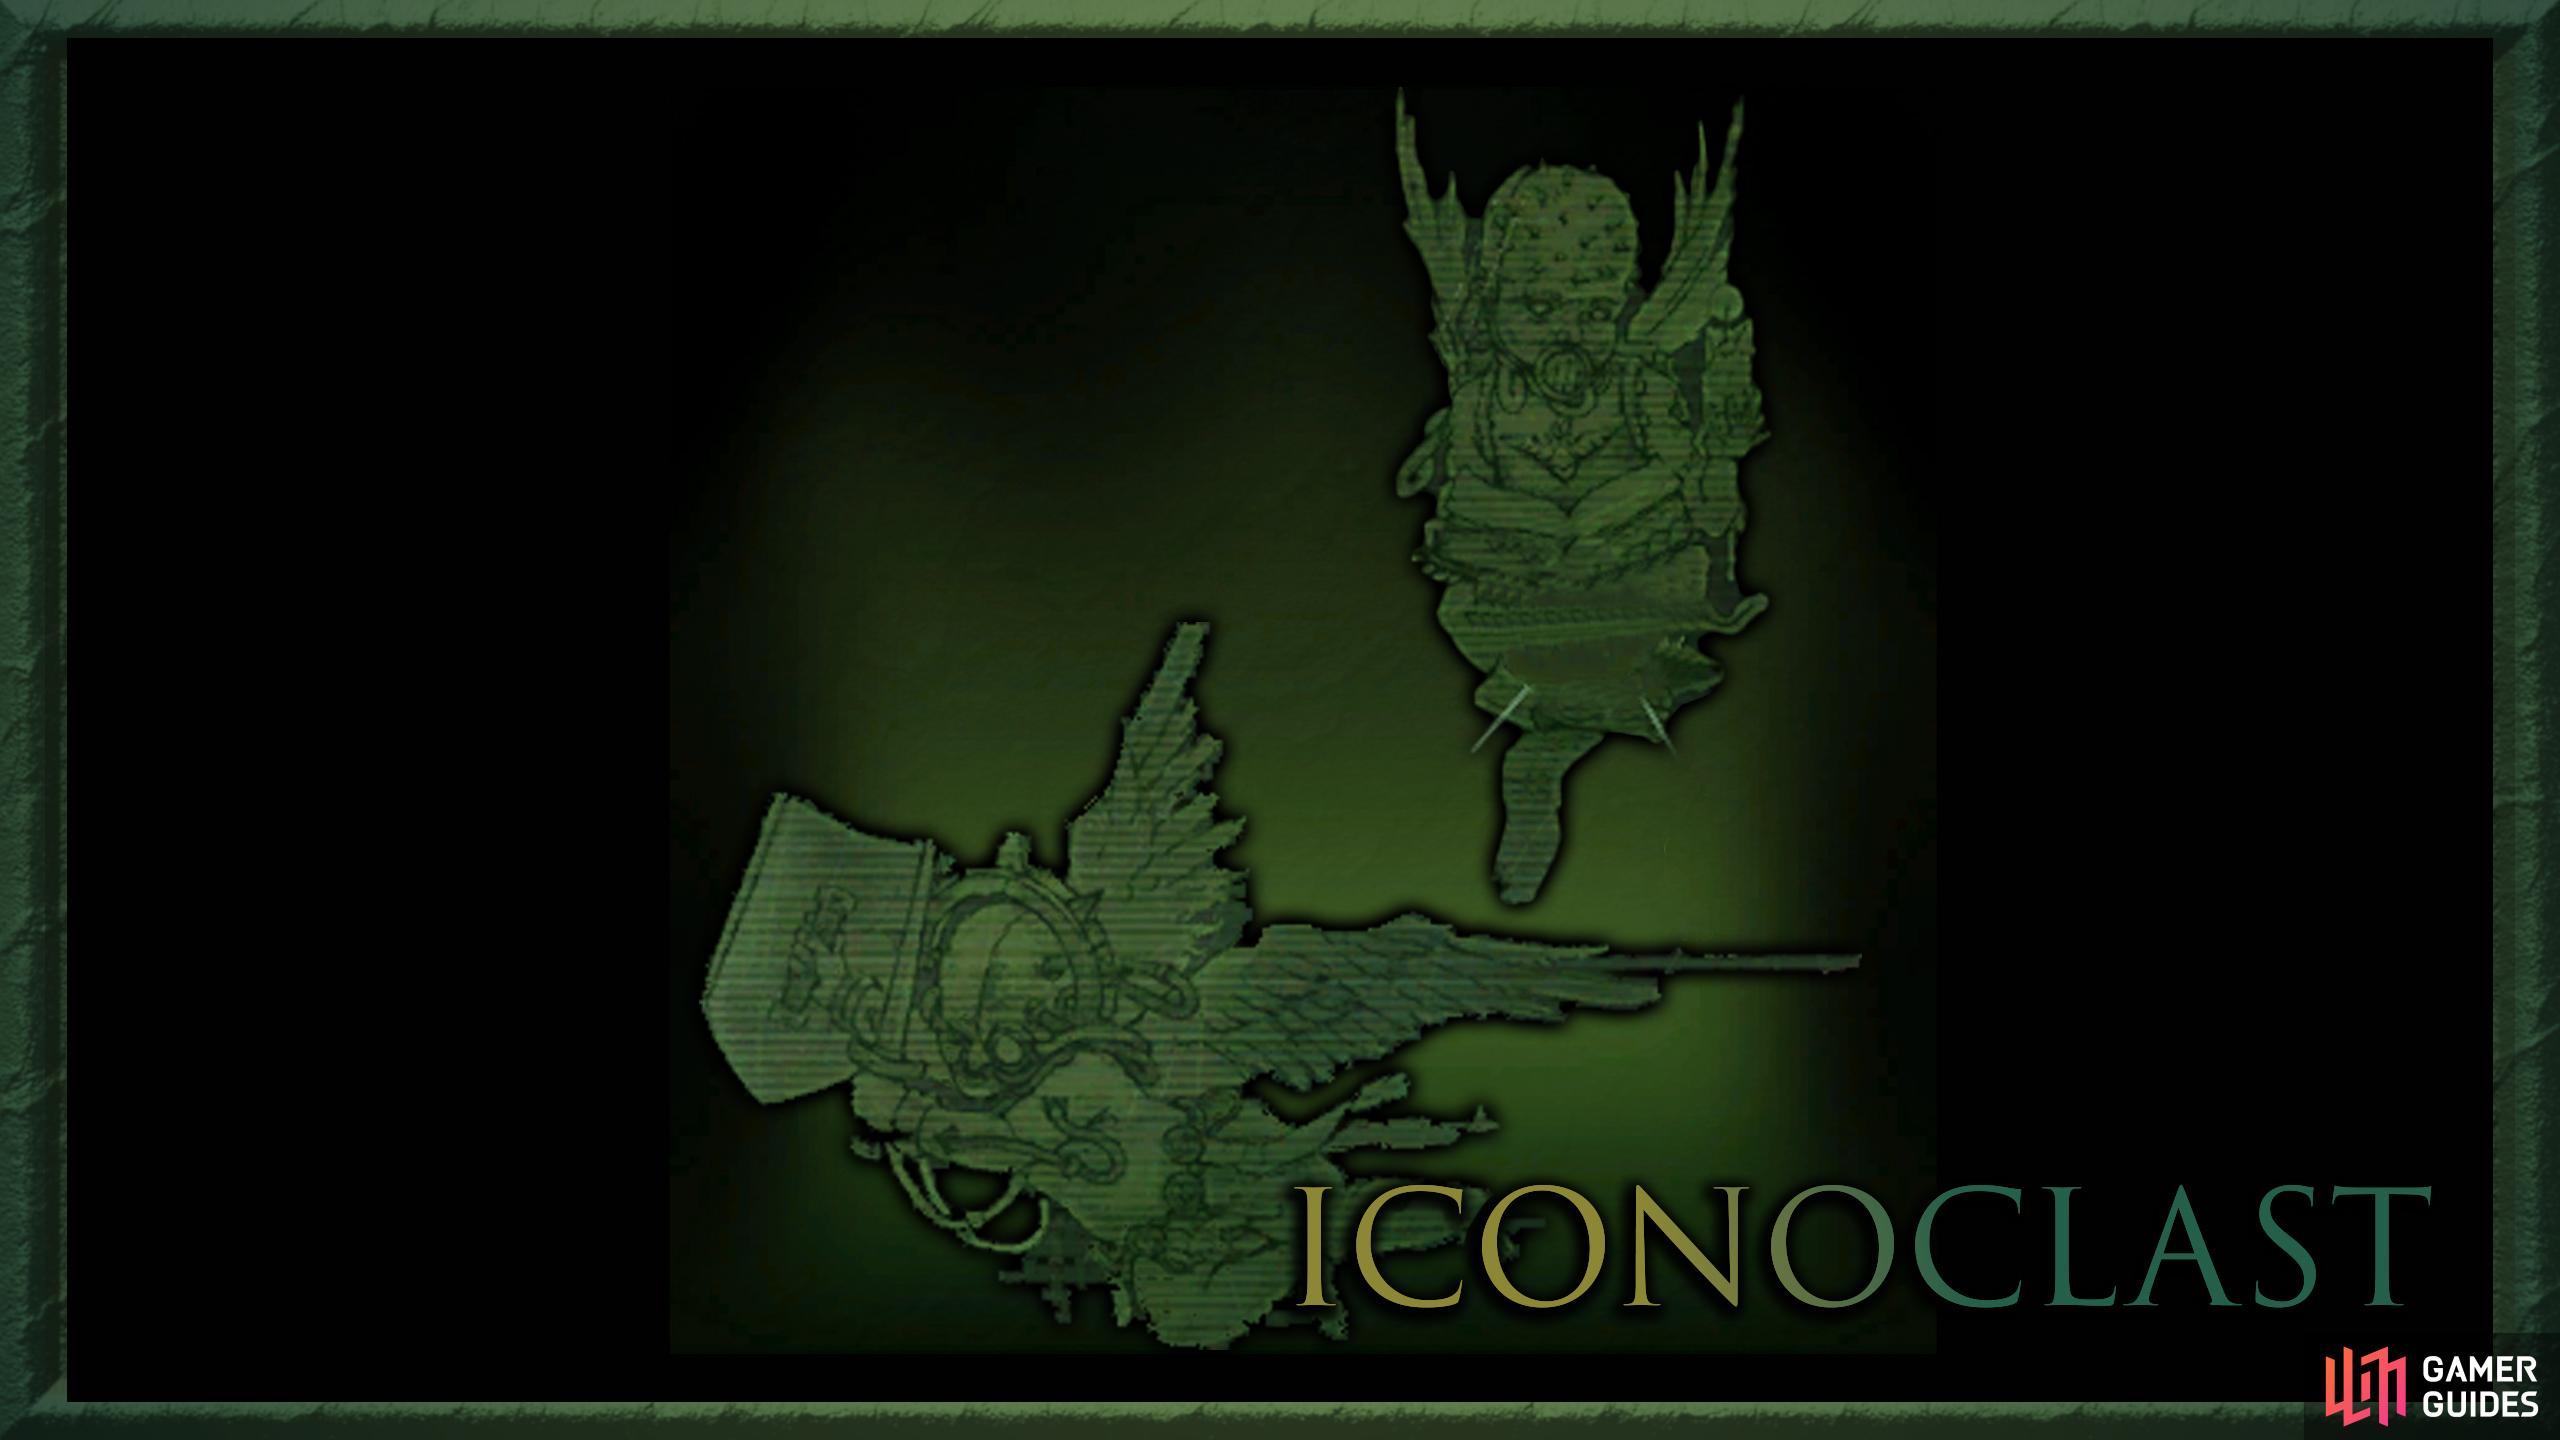 Iconoclast is one of the three convictions you can choose with the other two being Dogmatic, and Heretical.